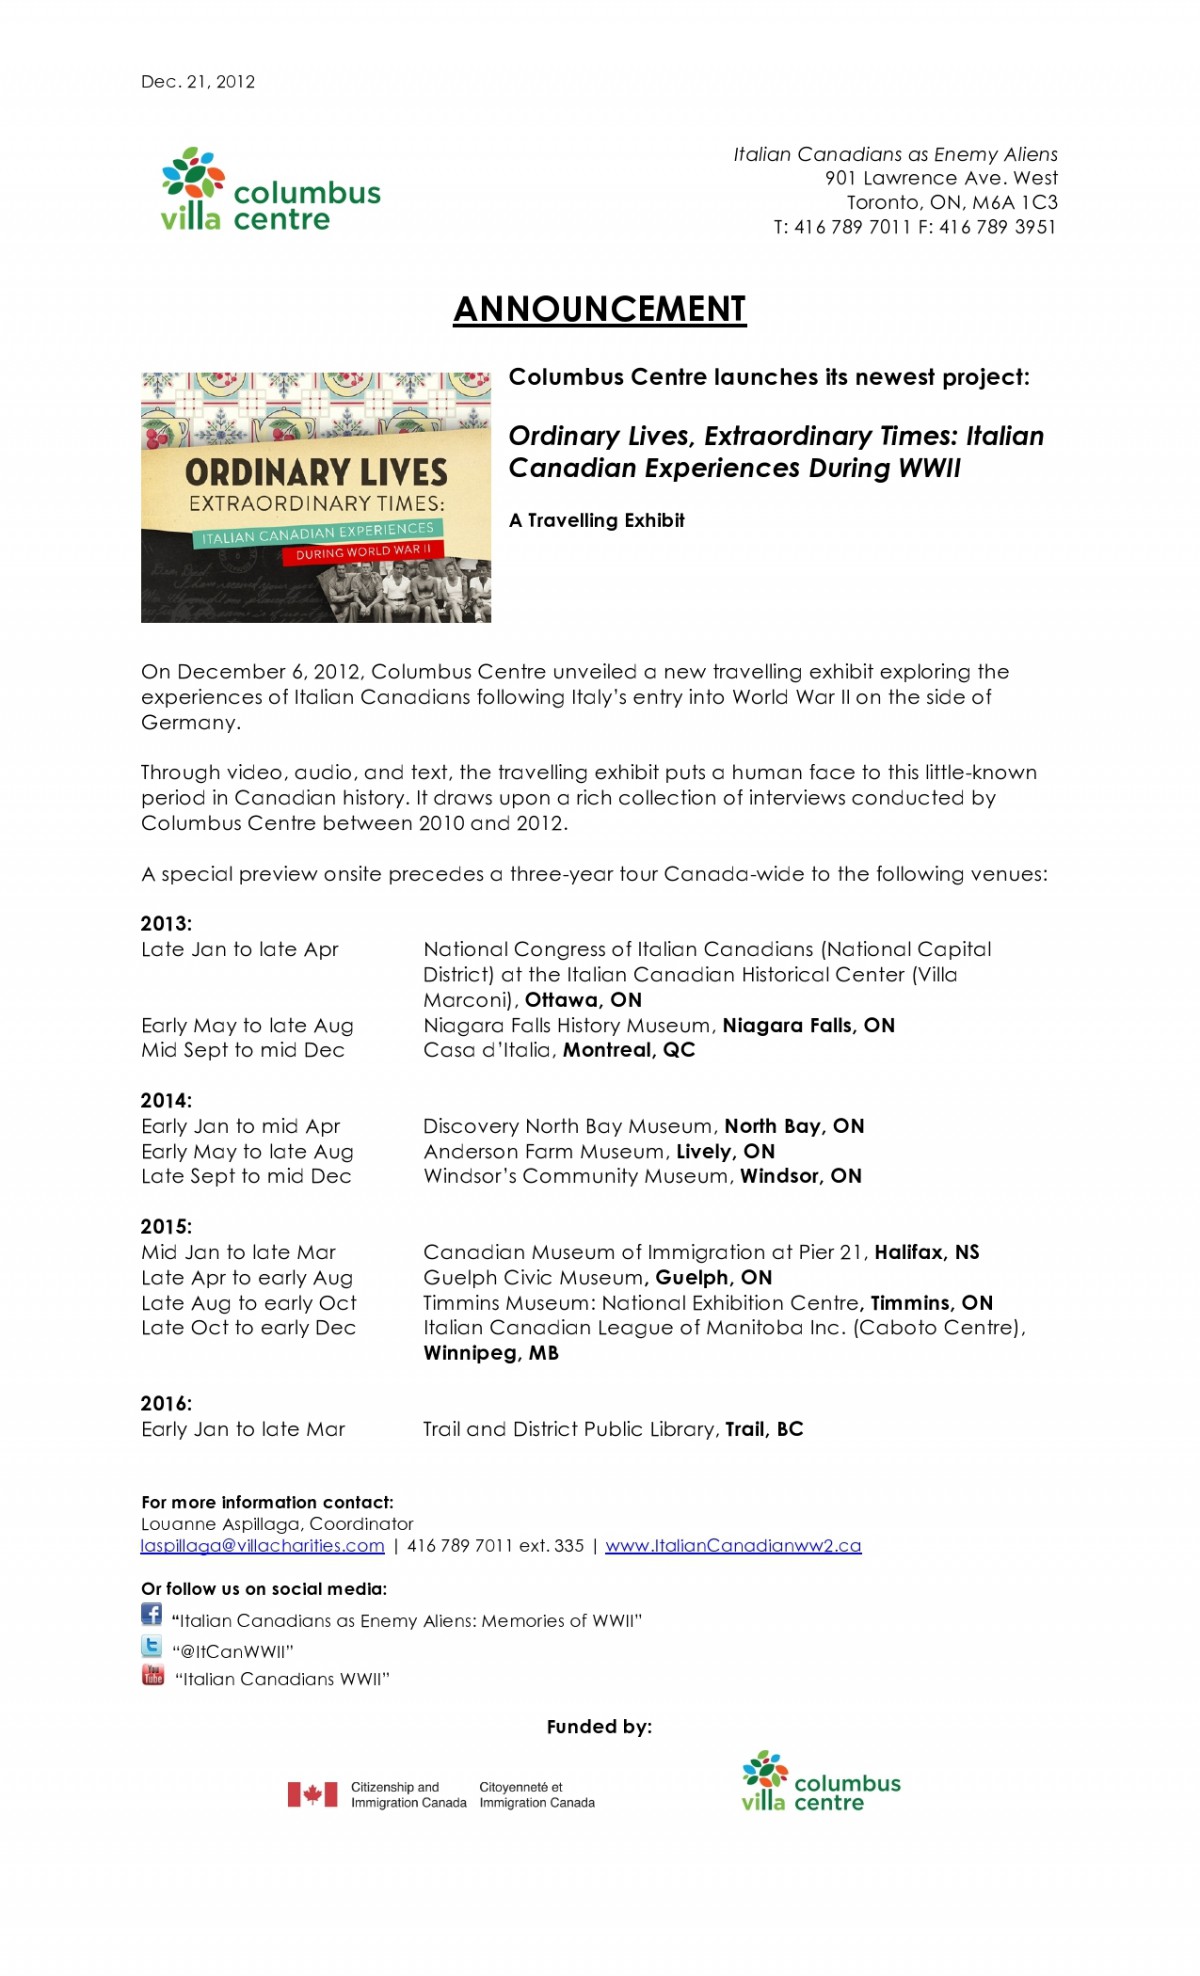 ANNOUNCEMENT: Columbus Centre’s new travelling exhibit, Ordinary Lives, Extraordinary Times: Italian Canadian Experiences During WWII, now on display onsite prior to its three year Canada-wide tour 